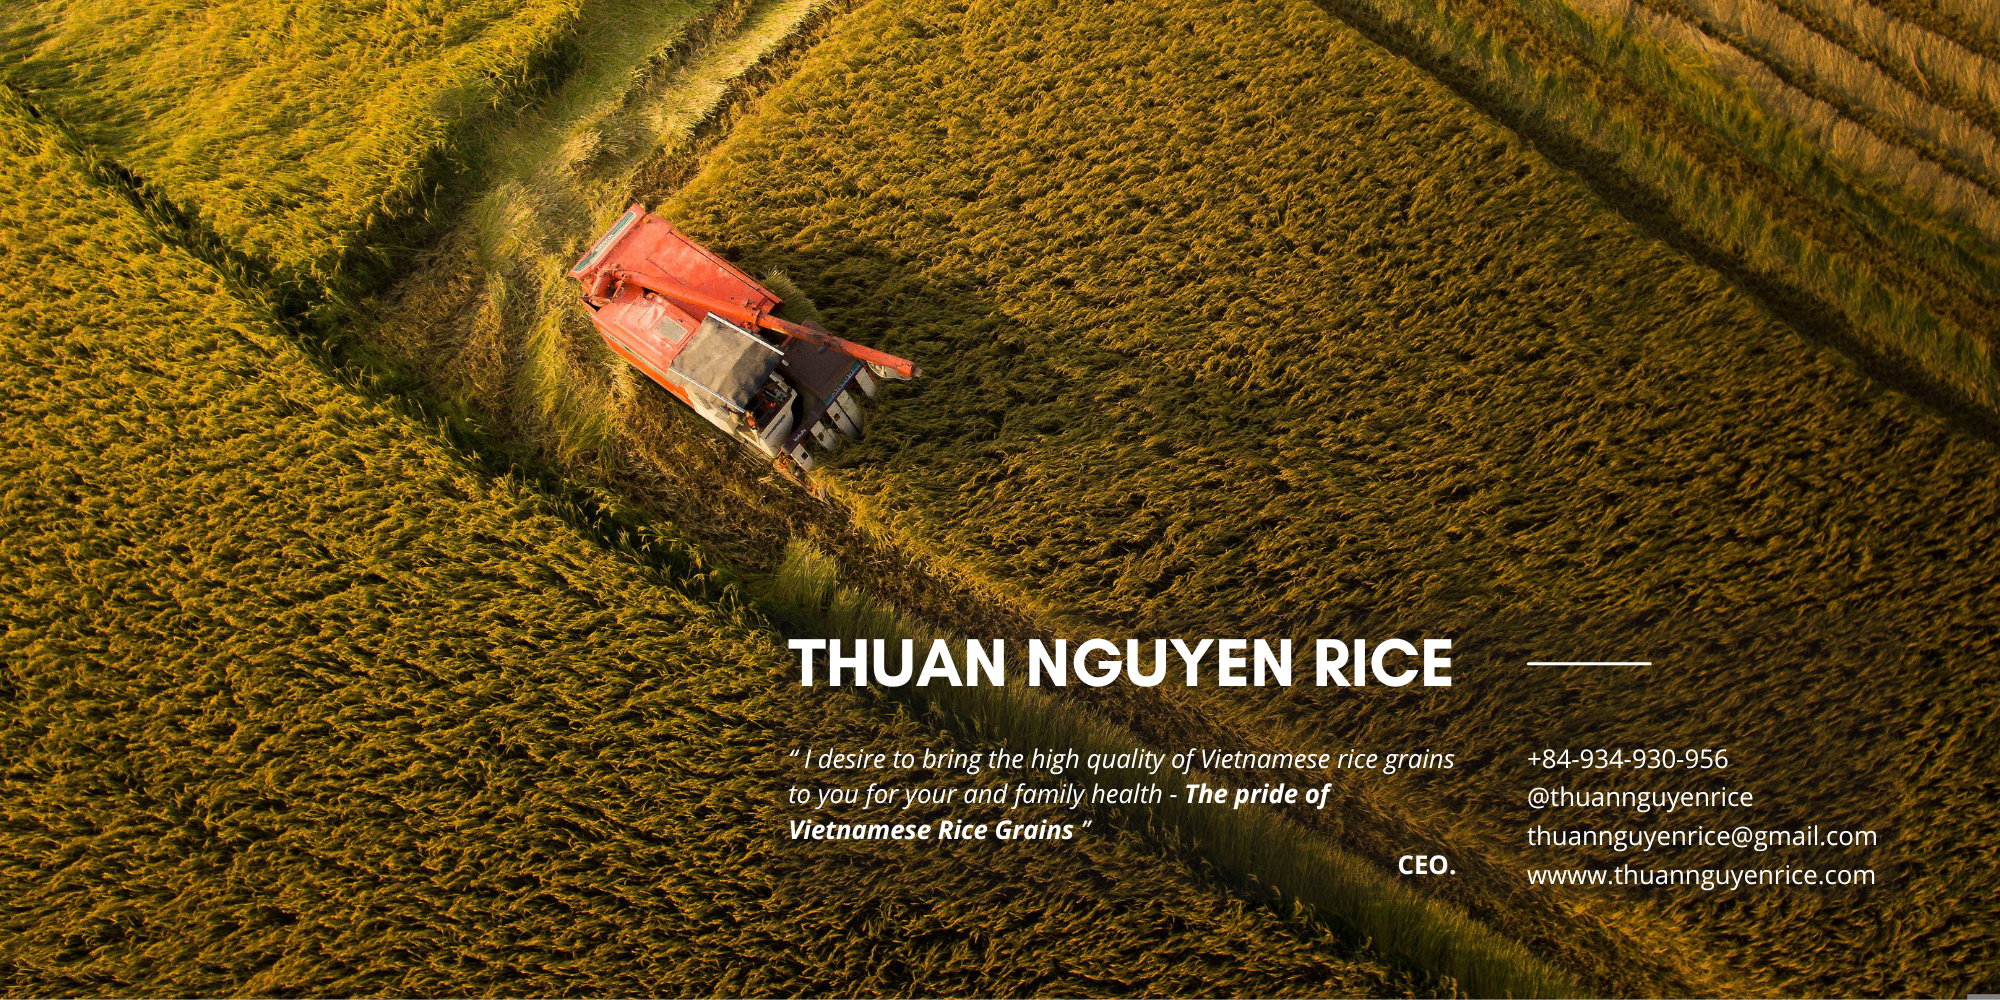 Challenges and Innovations in Rice Farming